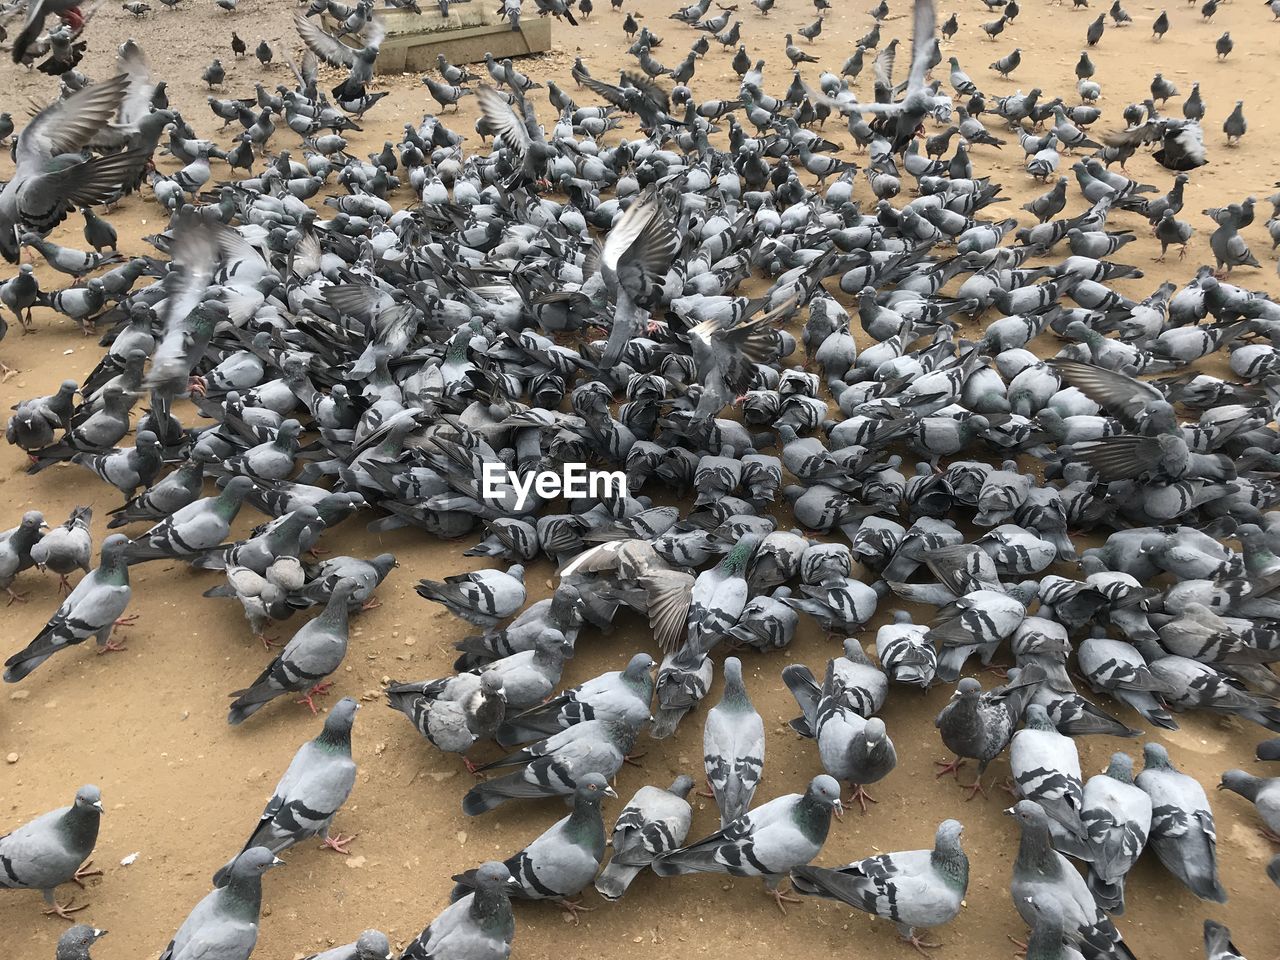 large group of animals, animal, group of animals, wildlife, animal wildlife, bird, animal themes, abundance, flock of birds, high angle view, no people, land, flock, day, nature, pigeons and doves, pigeon, large group of objects, beach, outdoors, animal migration, water